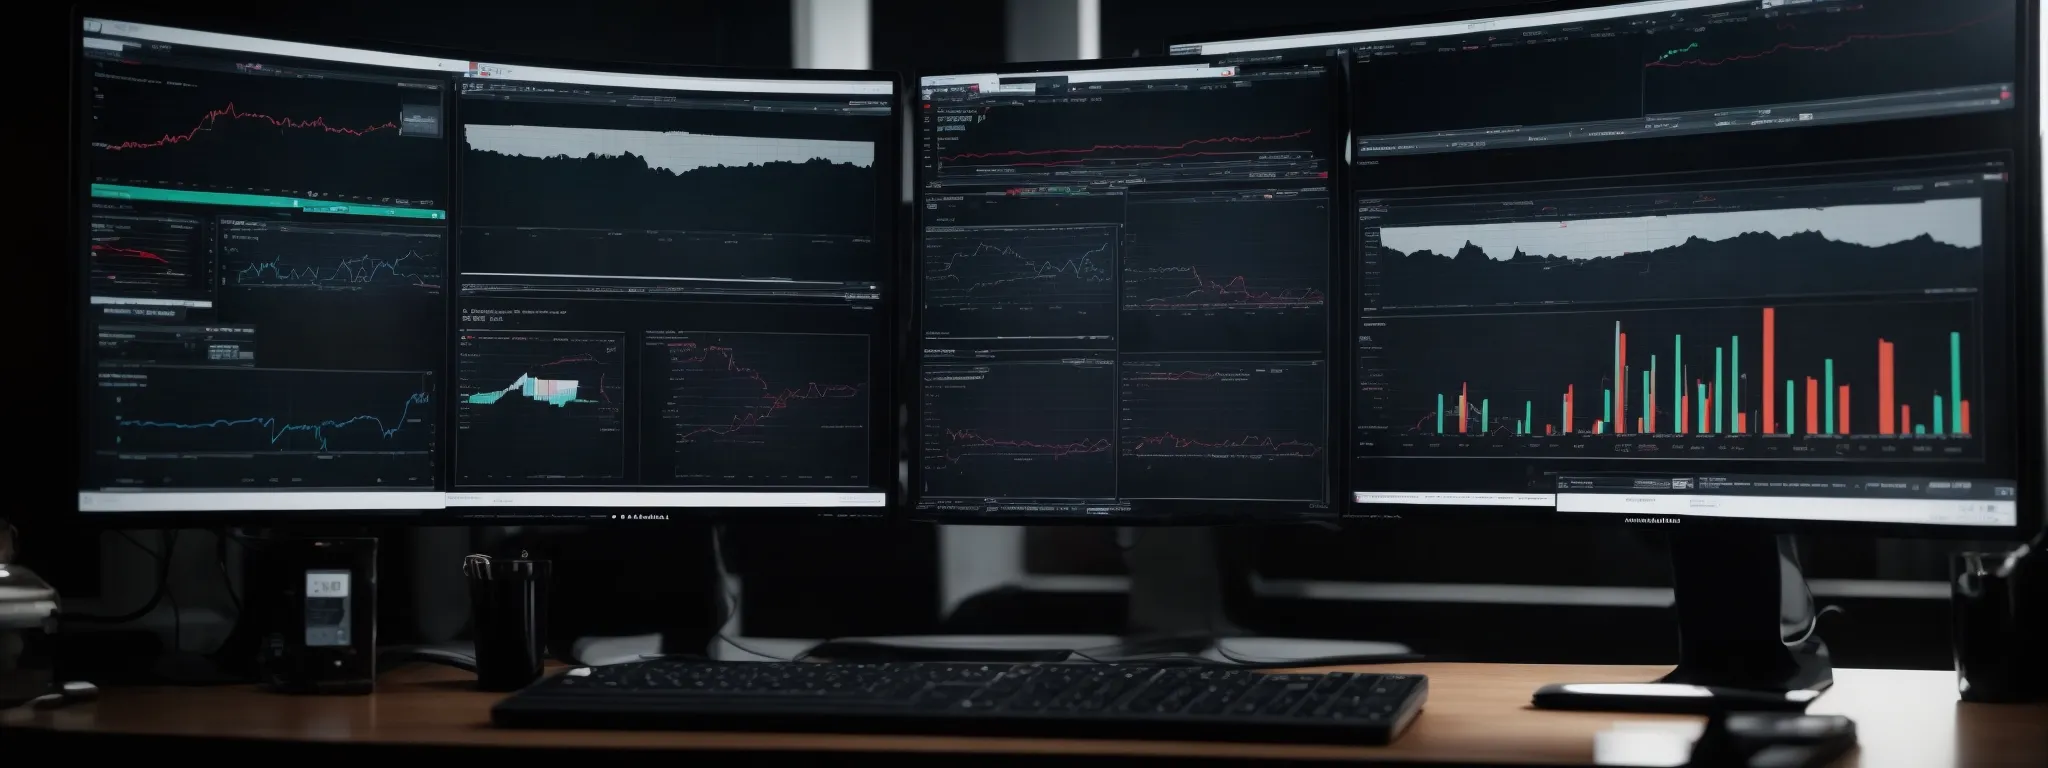 a desktop with multiple screens displaying various graphs and data analytics dashboards.